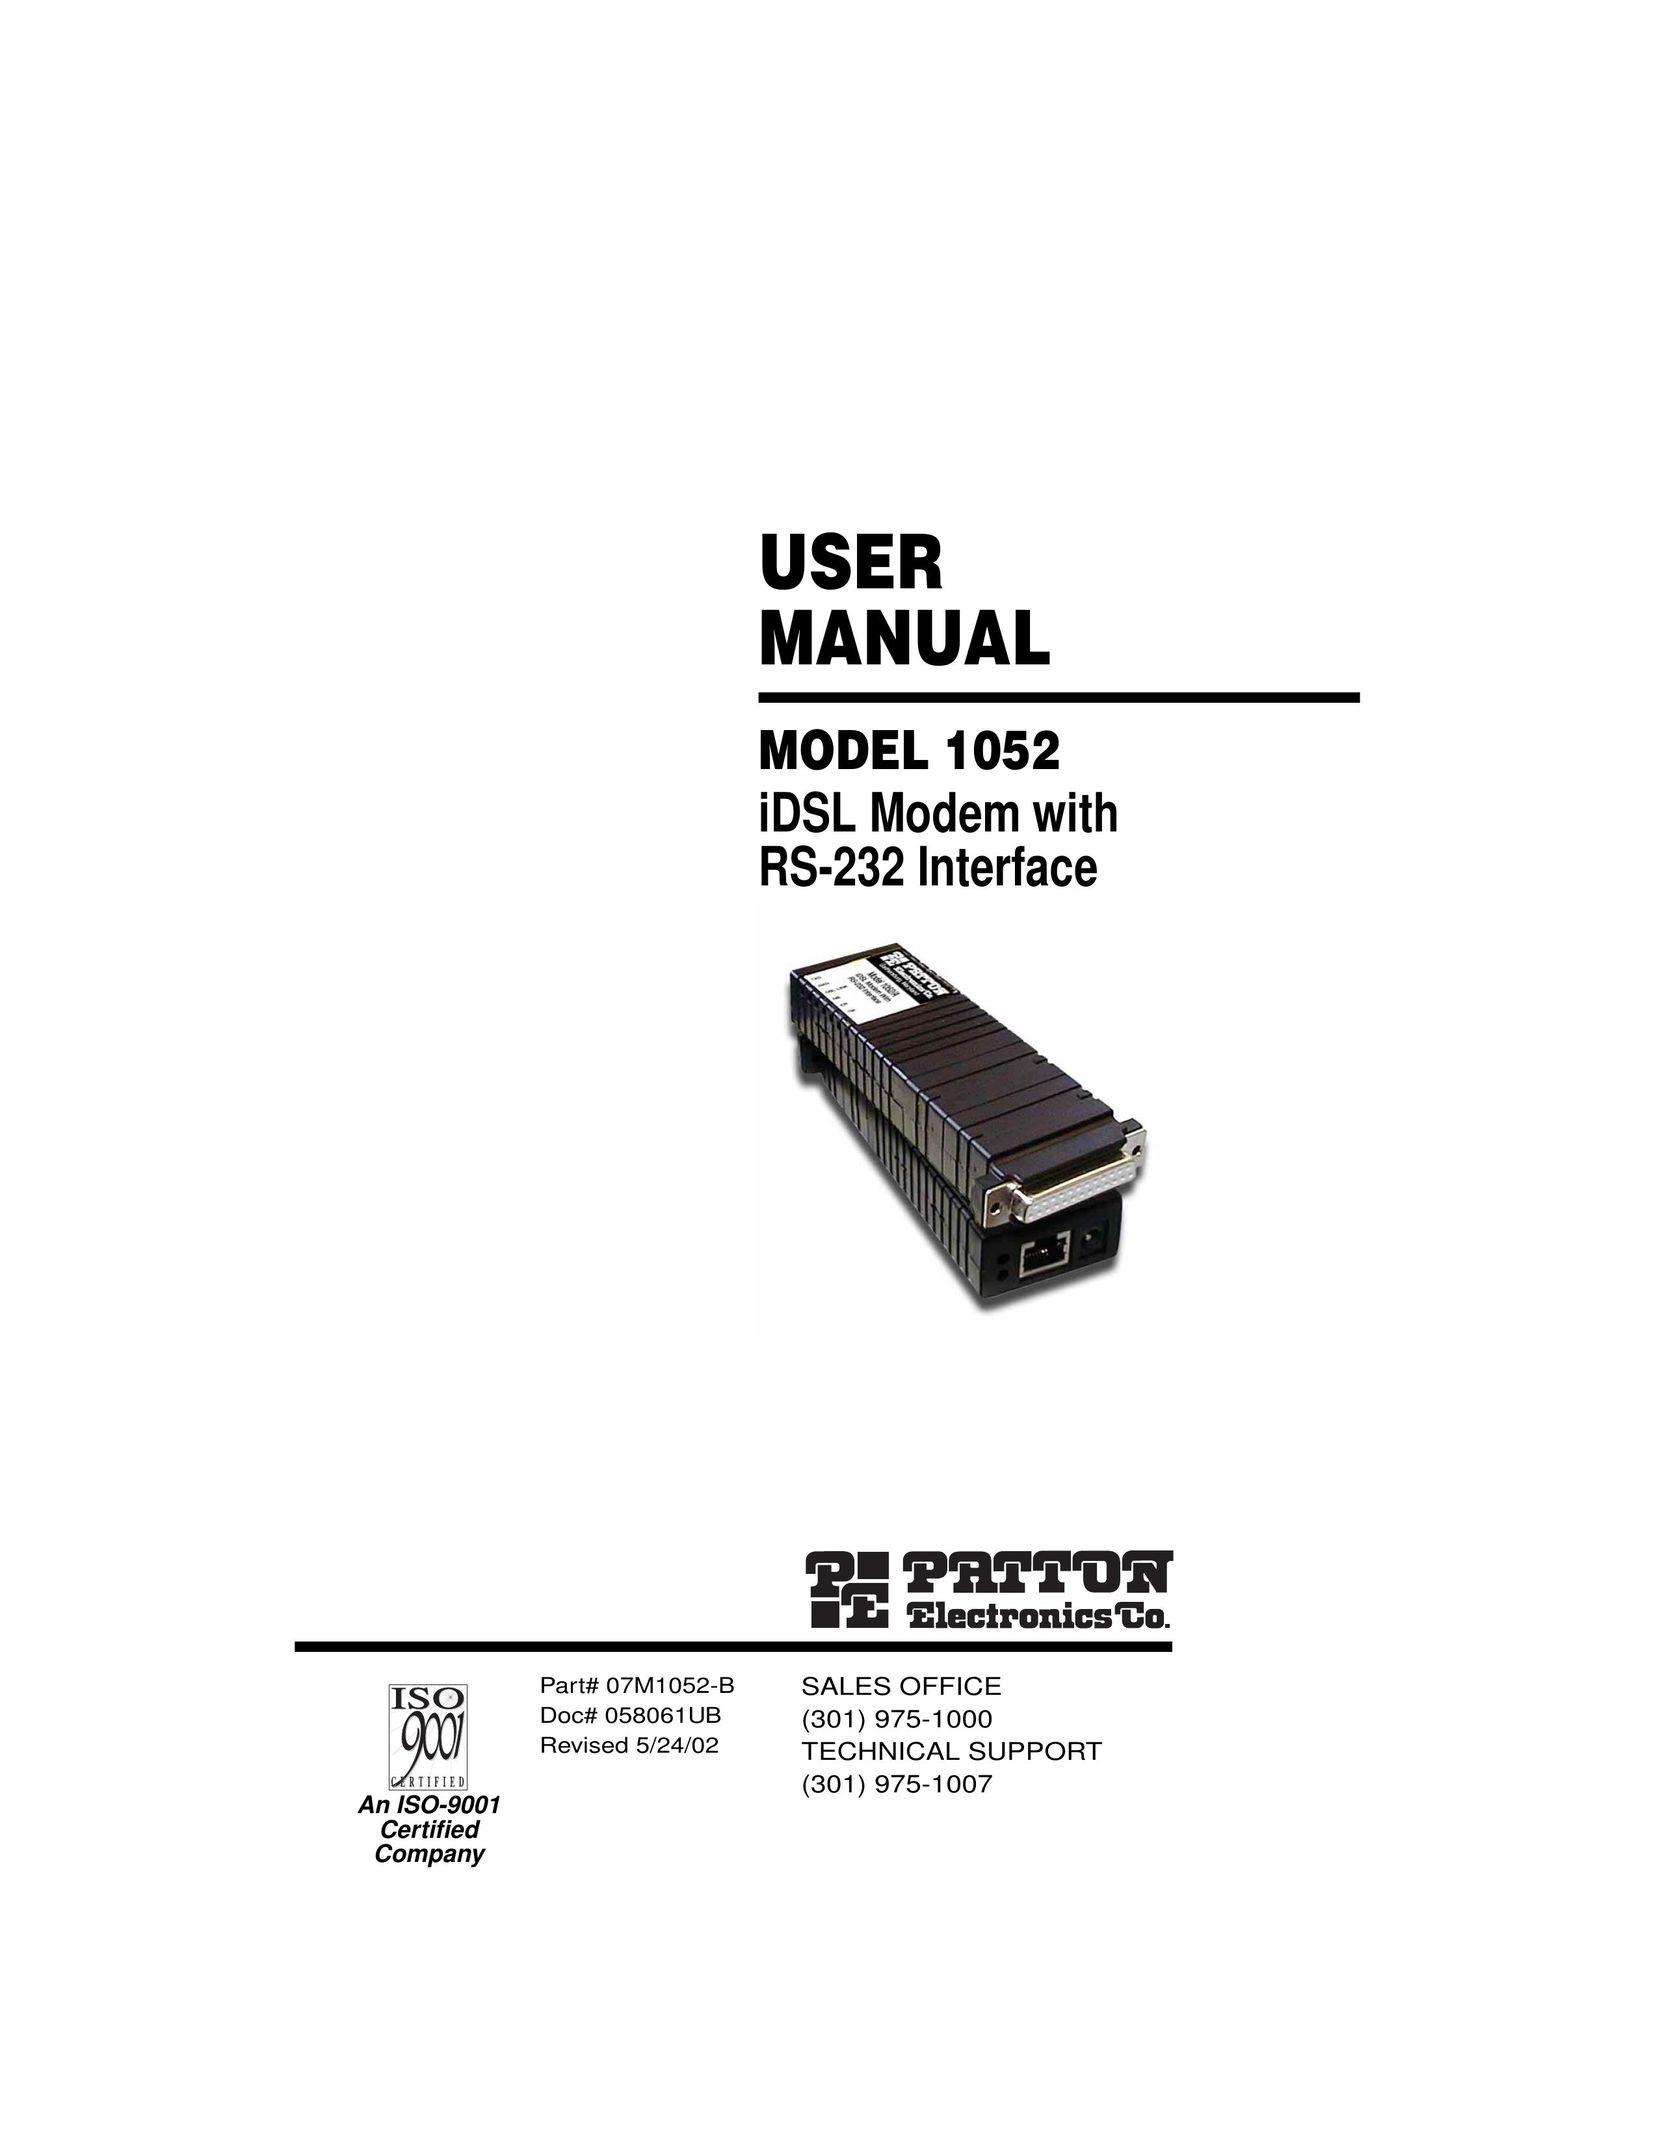 Patton electronic 1052 Network Card User Manual